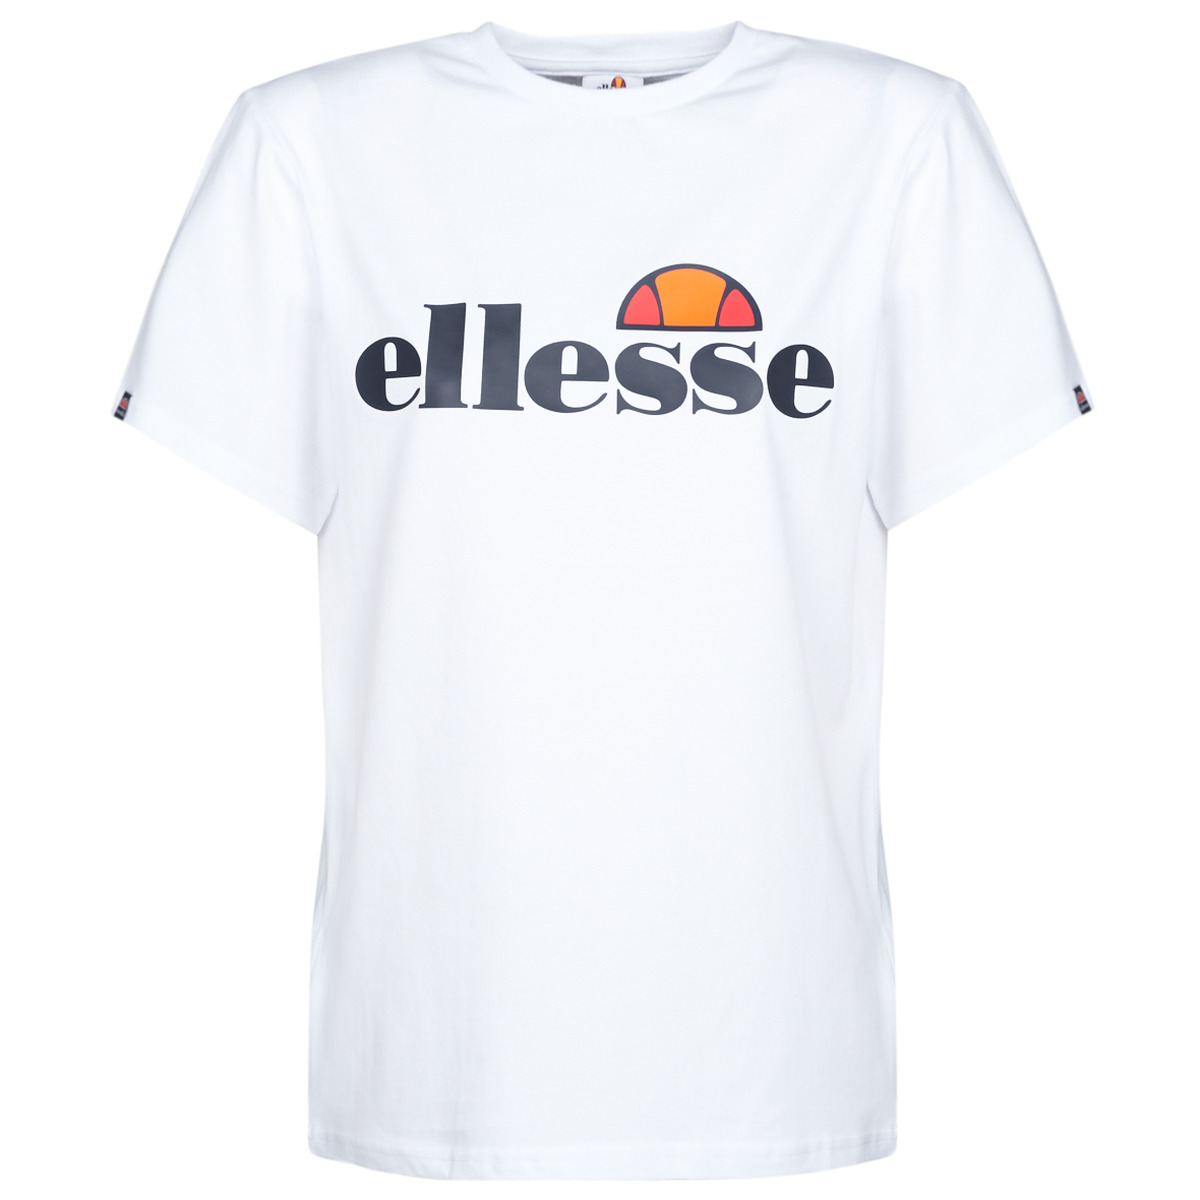 | t-shirts ! White NET Ellesse Clothing Women delivery ALBANY - - Spartoo short-sleeved Free